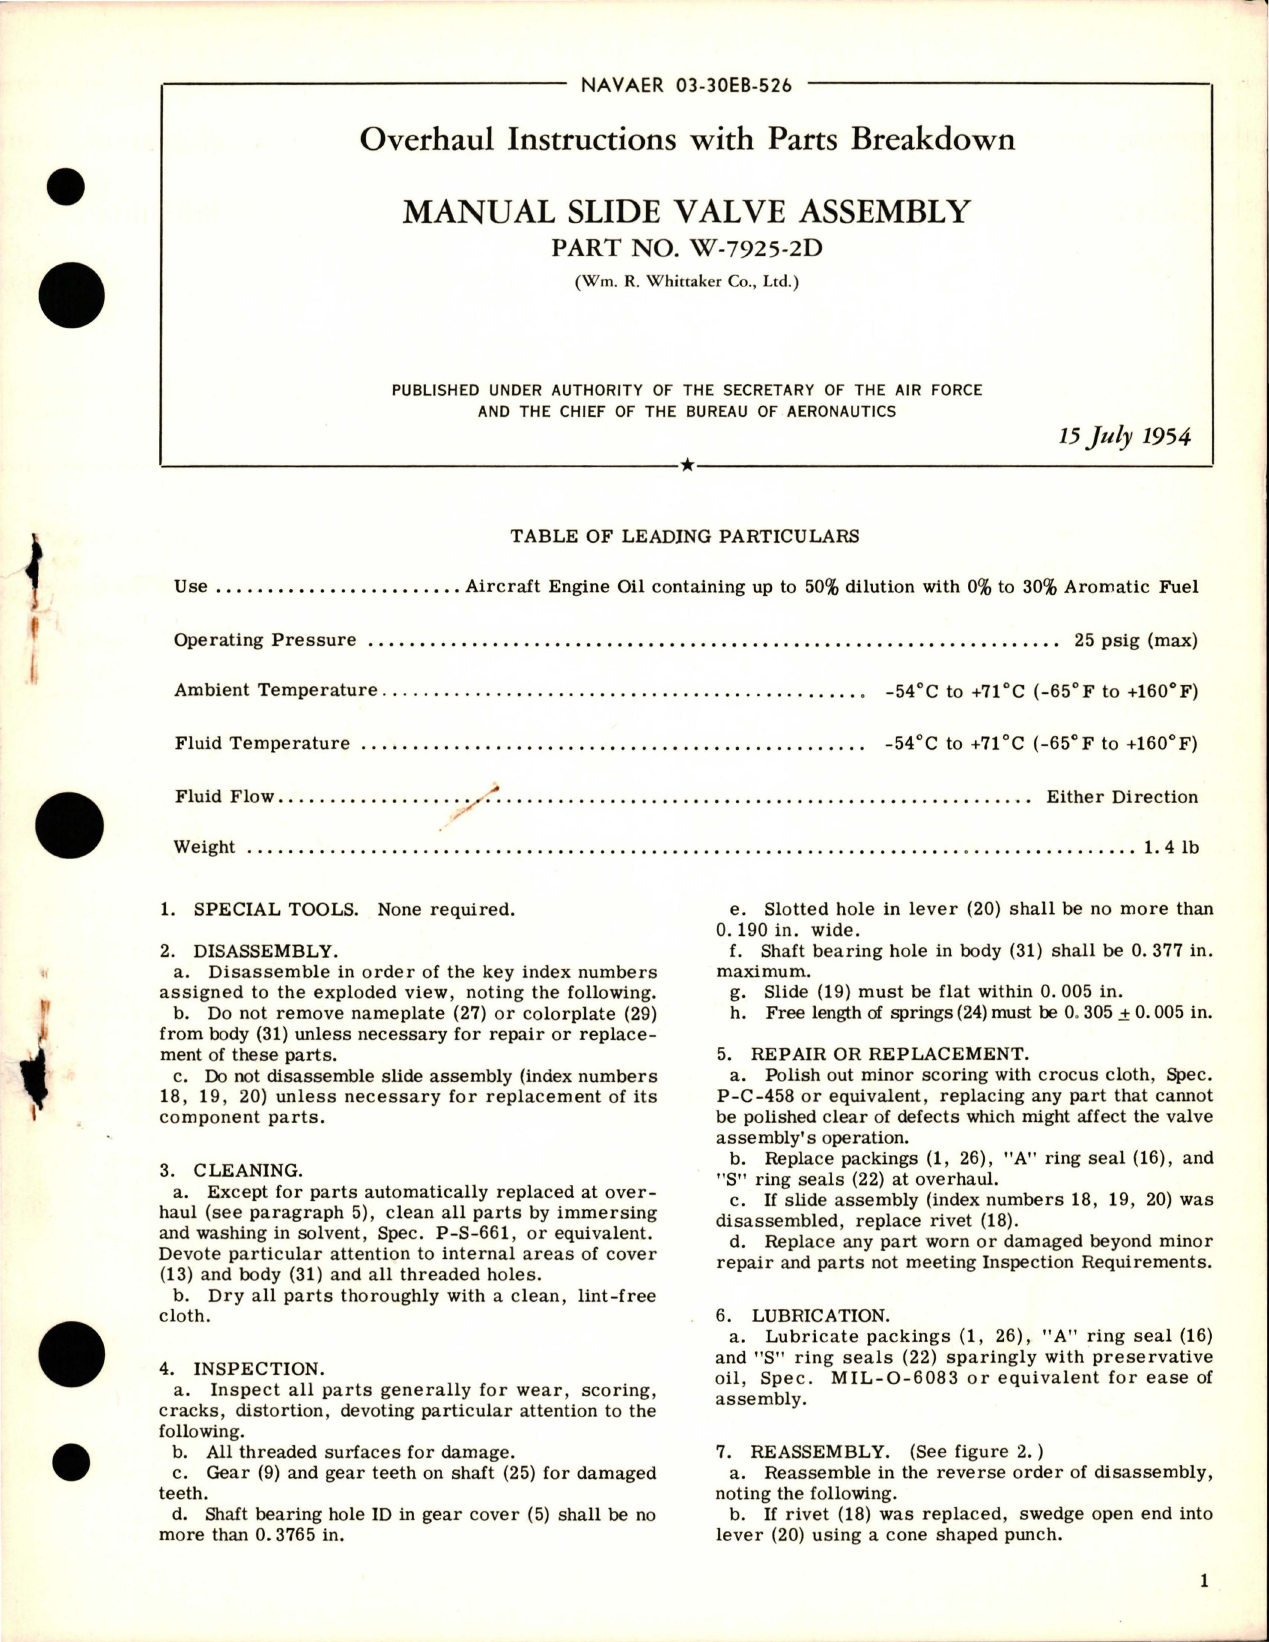 Sample page 1 from AirCorps Library document: Overhaul Instructions with Parts Breakdown for Manual Slide Valve Assembly - Part W-7925-2D